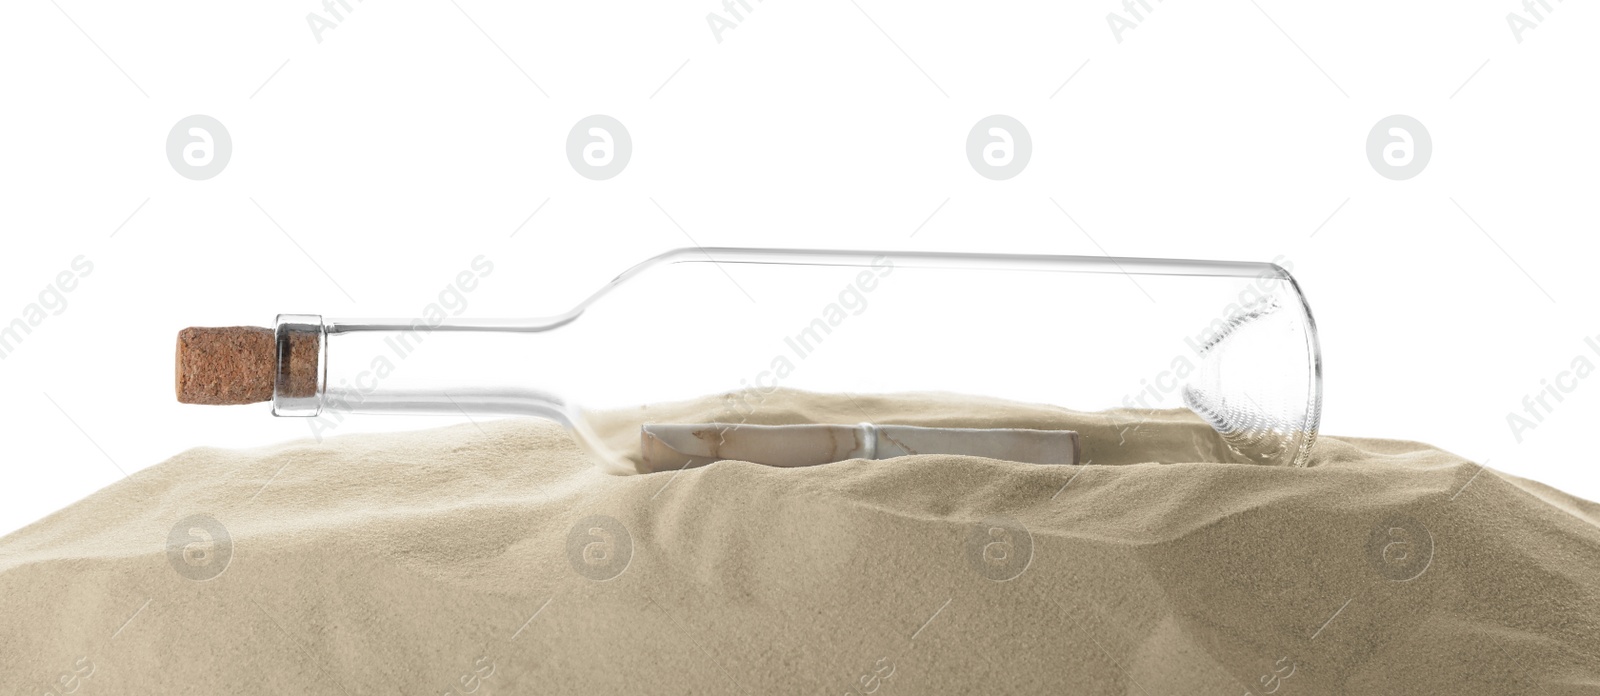 Photo of Corked glass bottle with rolled paper note on sand against white background